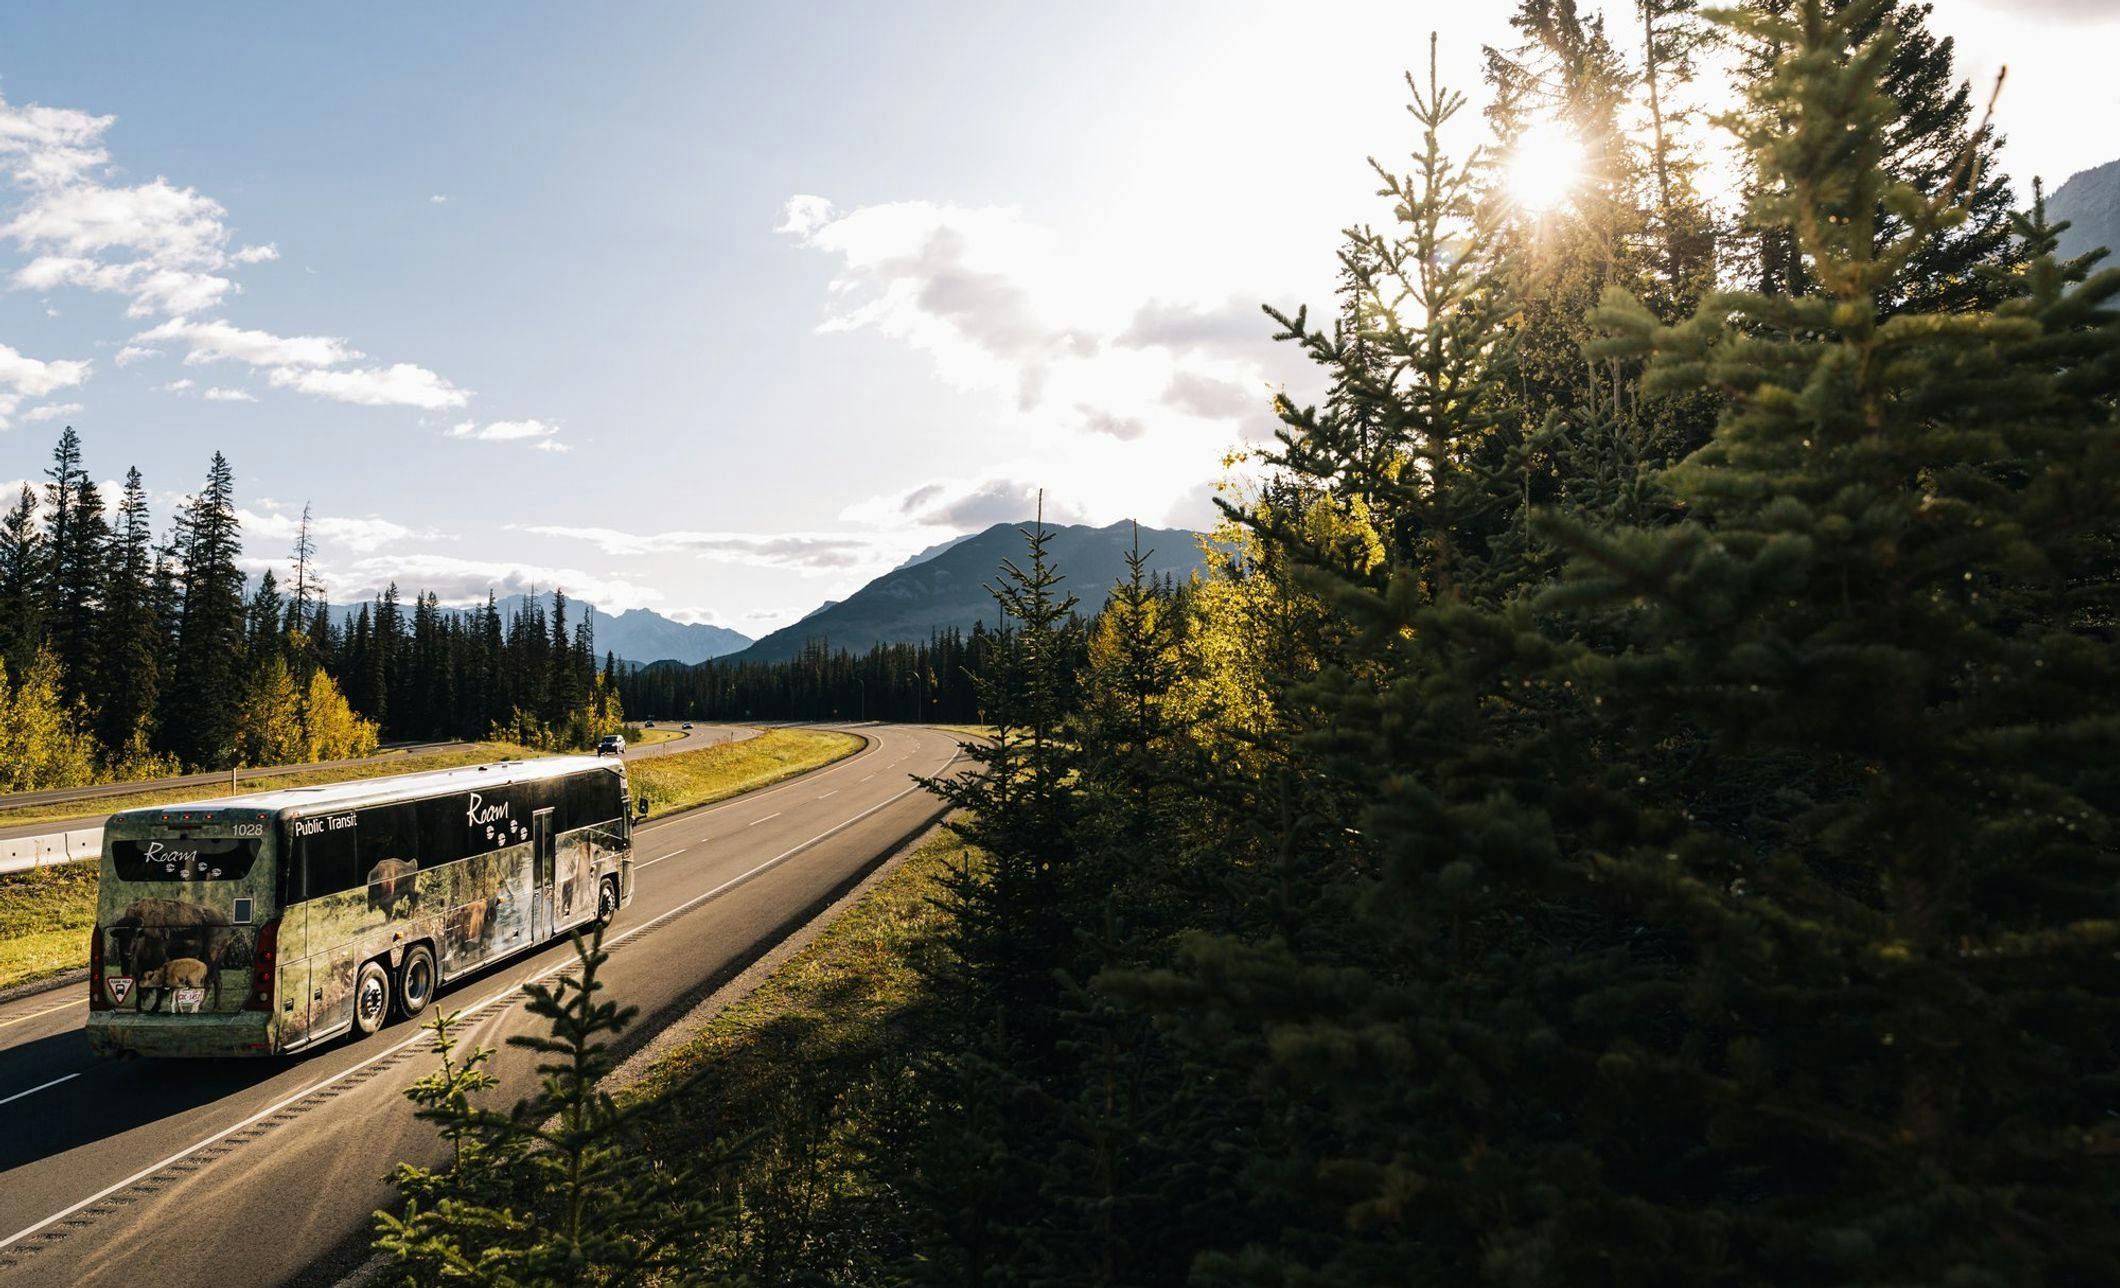 A motorcoach bus with wildlife on the sides travels along a stretch of highway towards mountains and framed by tall green trees on a sunny day